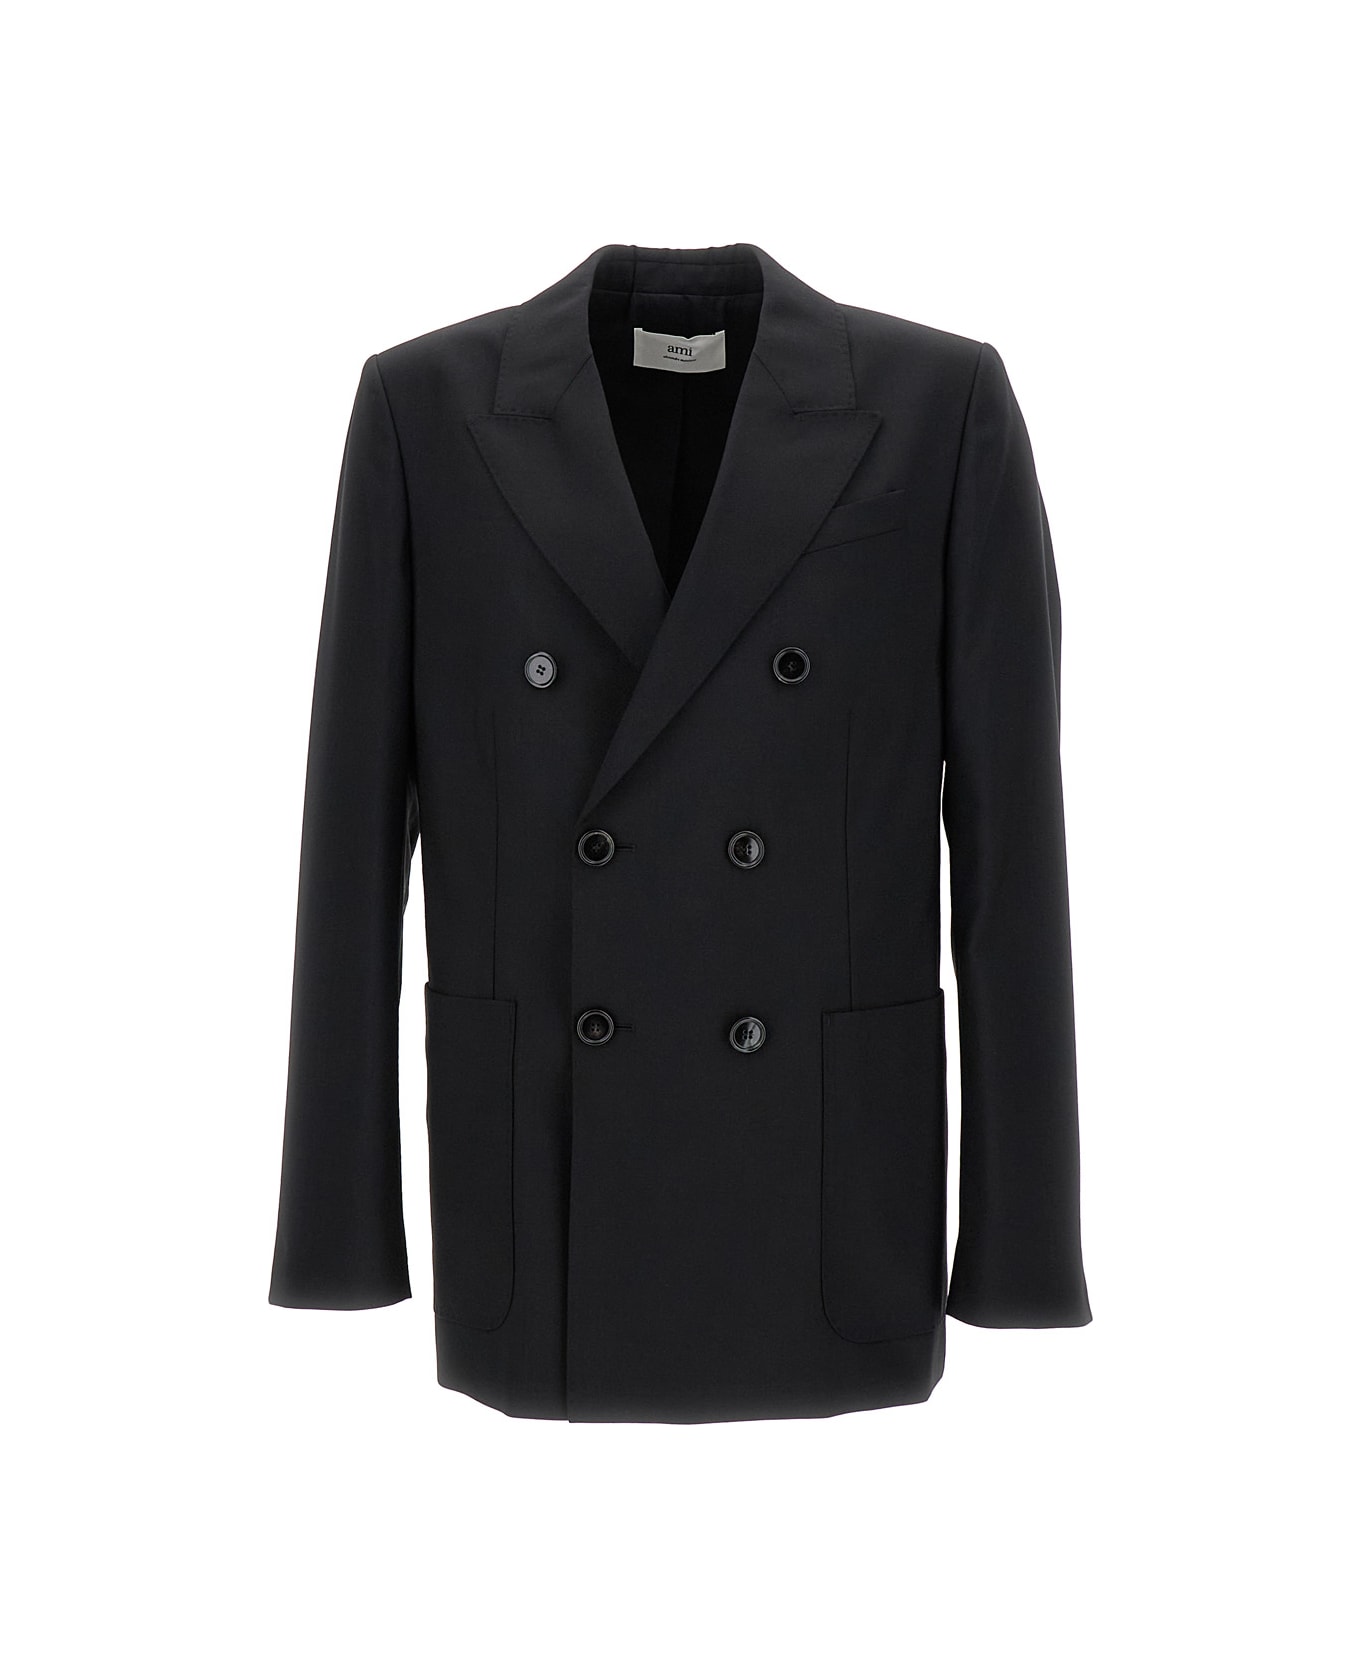 Ami Alexandre Mattiussi Black Double Breasted Blazer With Buttons In Wool Man - BLACK コート